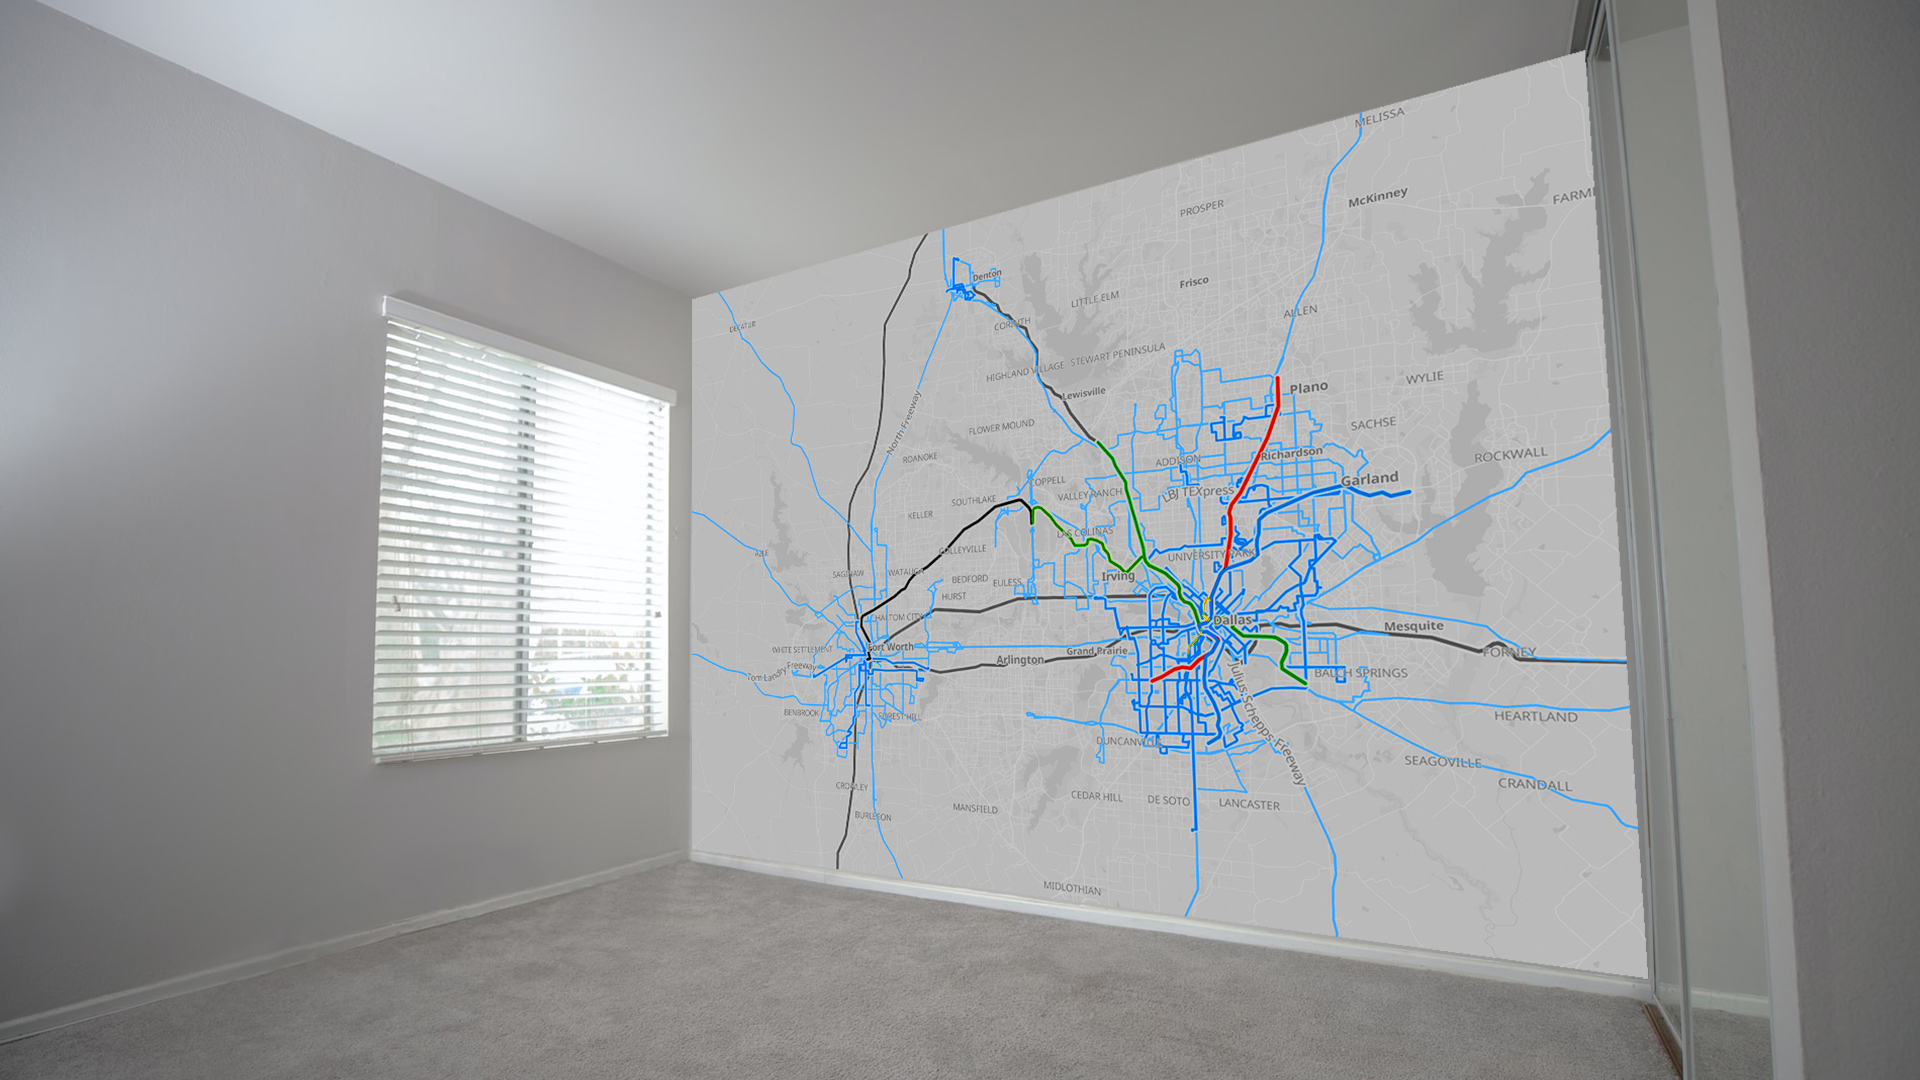 Map of all public transit lines in North Texas projected onto a blank wall in an empty room.